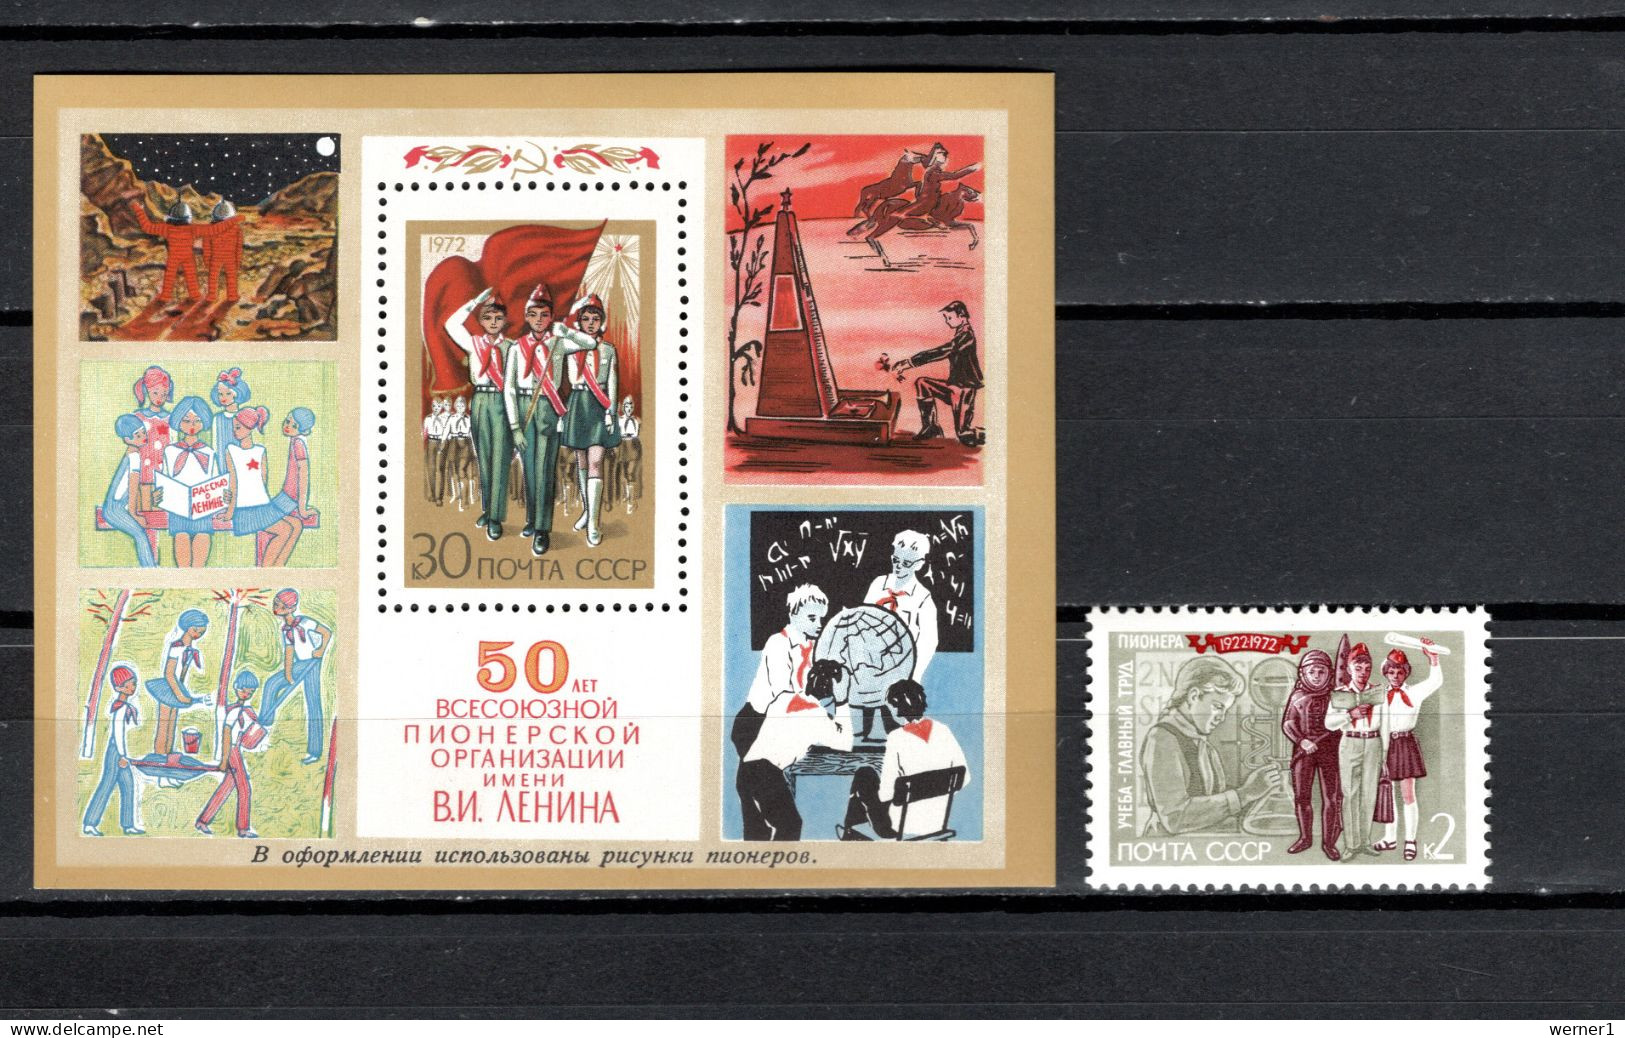 USSR Russia 1972 Space, Scouts Stamp + S/s MNH - Russia & USSR